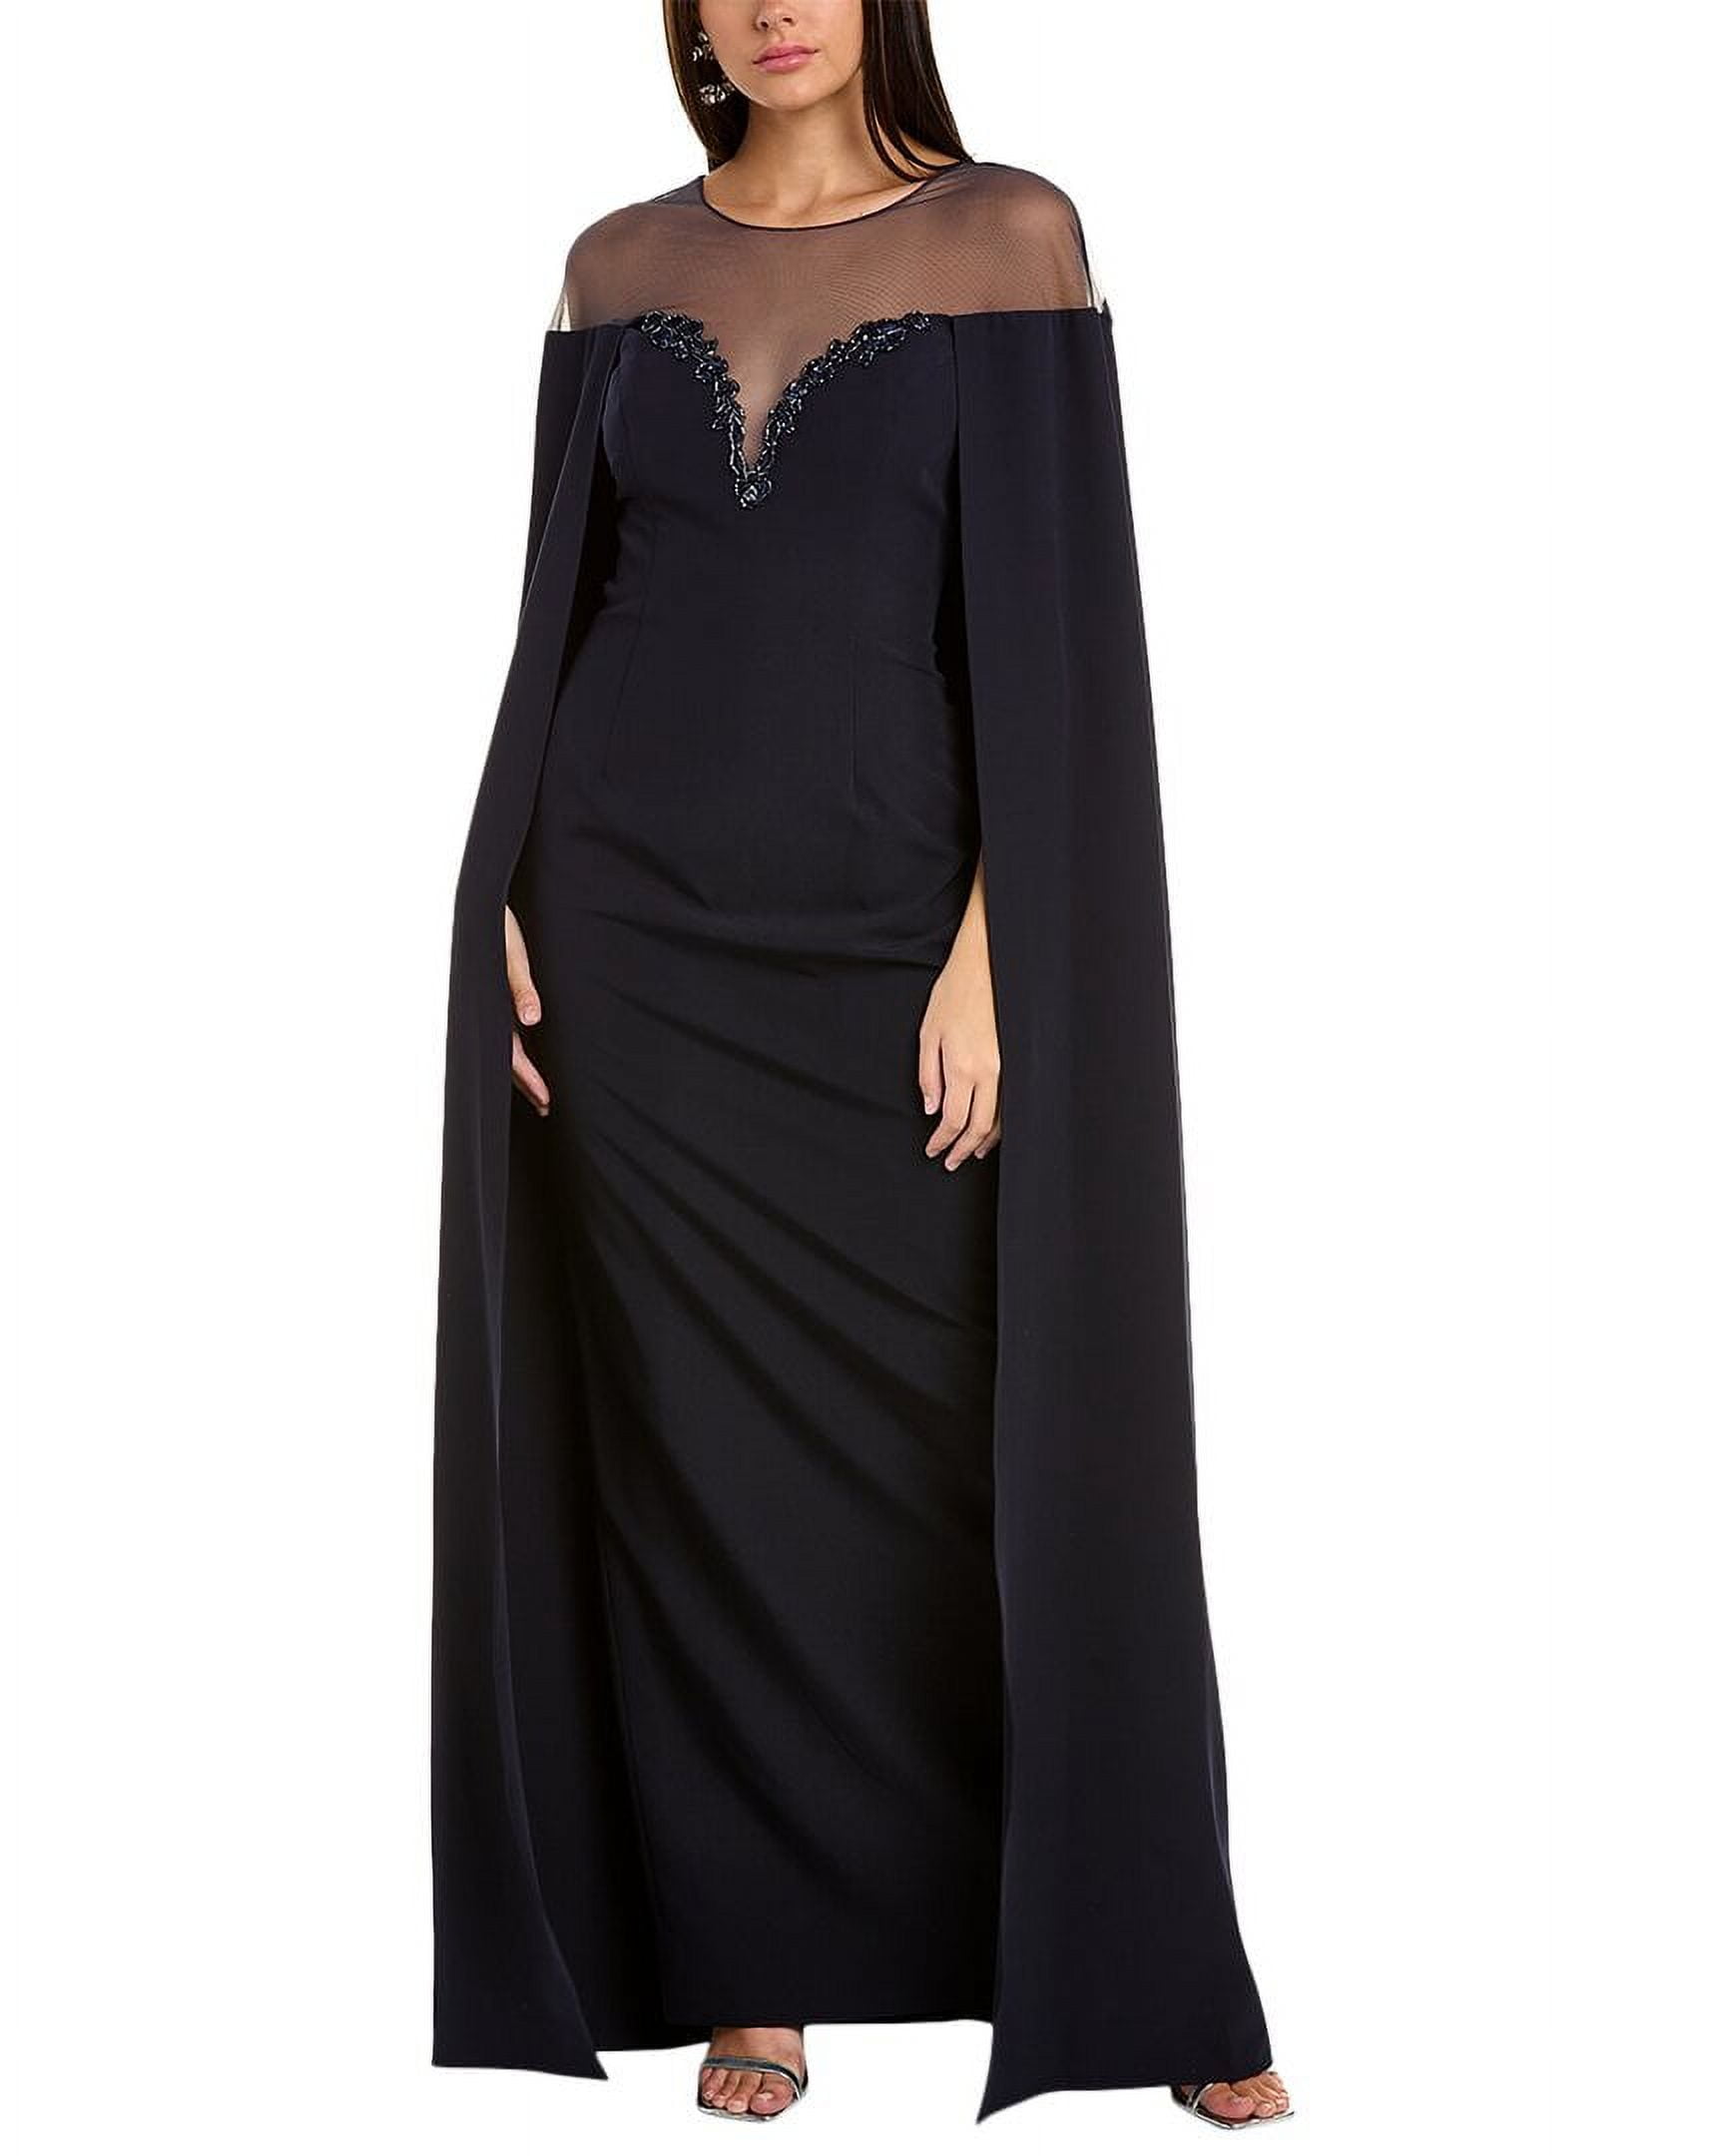 Elianna Draped Cape Gown - ASAVAGROUP